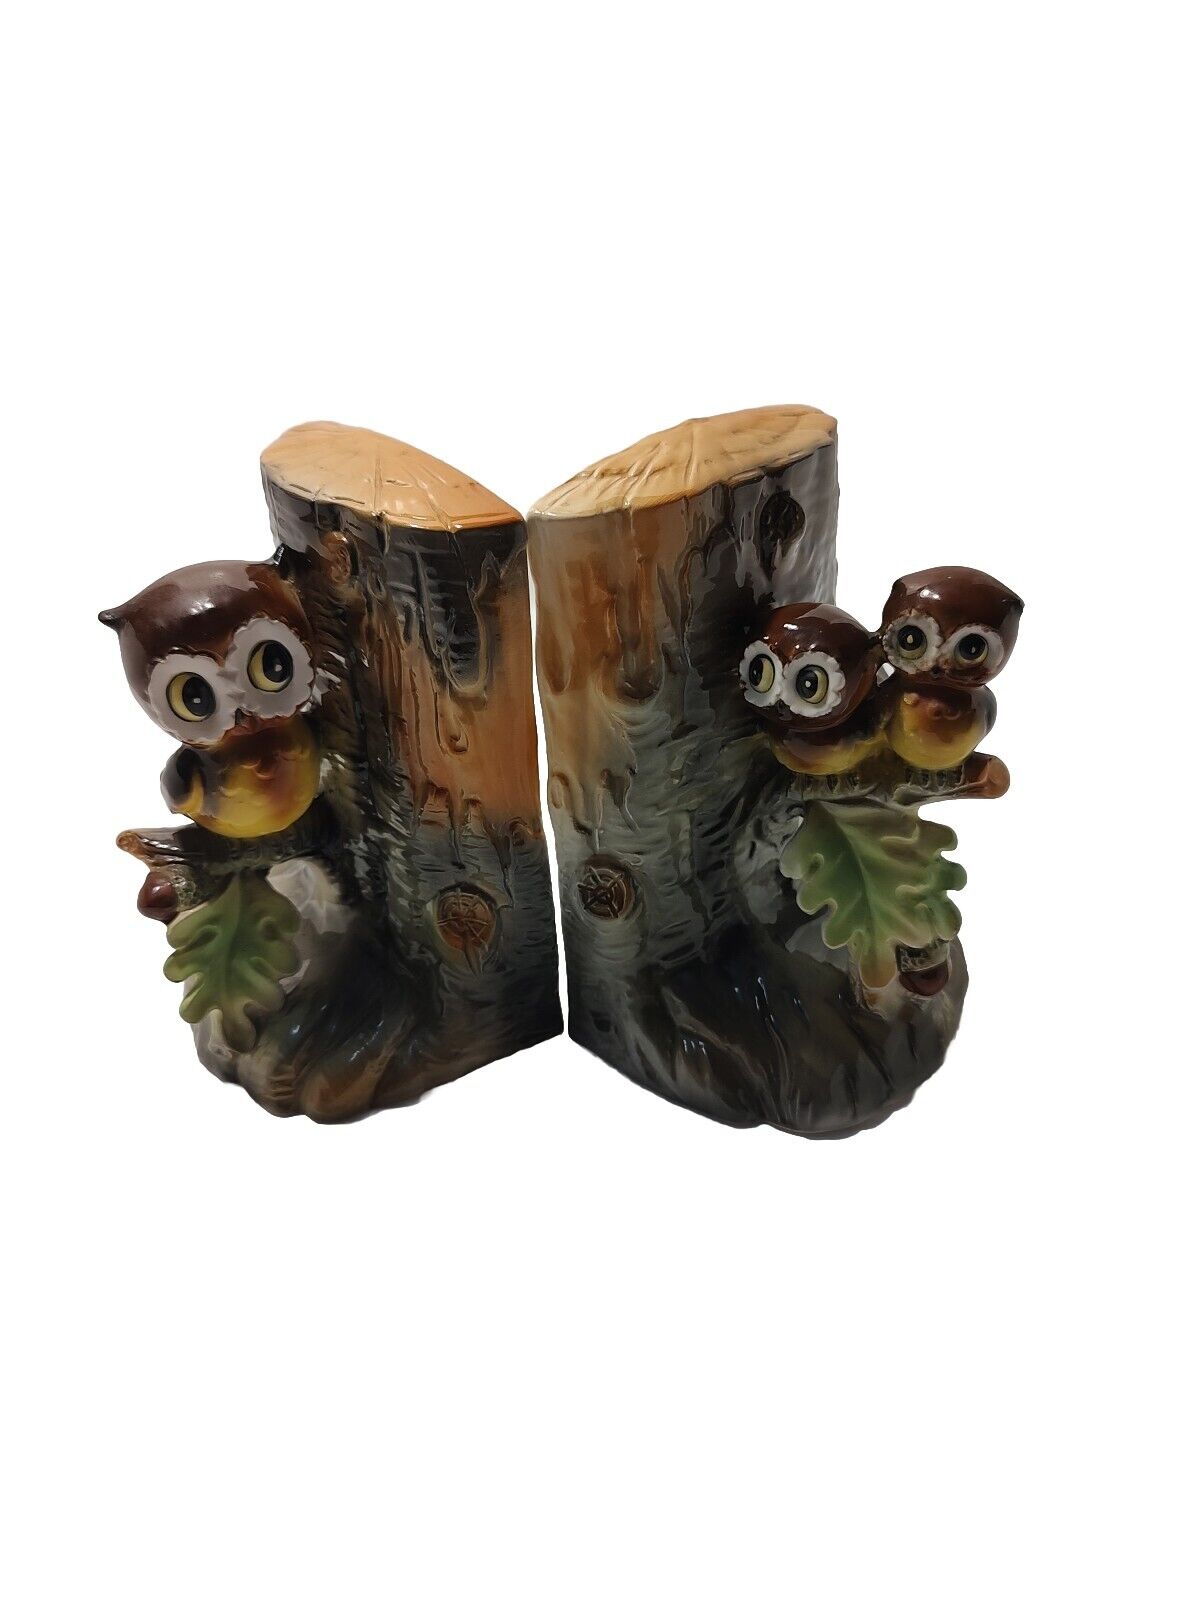 Vintage Norcrest Owl Ceramic Bookends Grannycore Kitsch Made In Japan Rare Cute